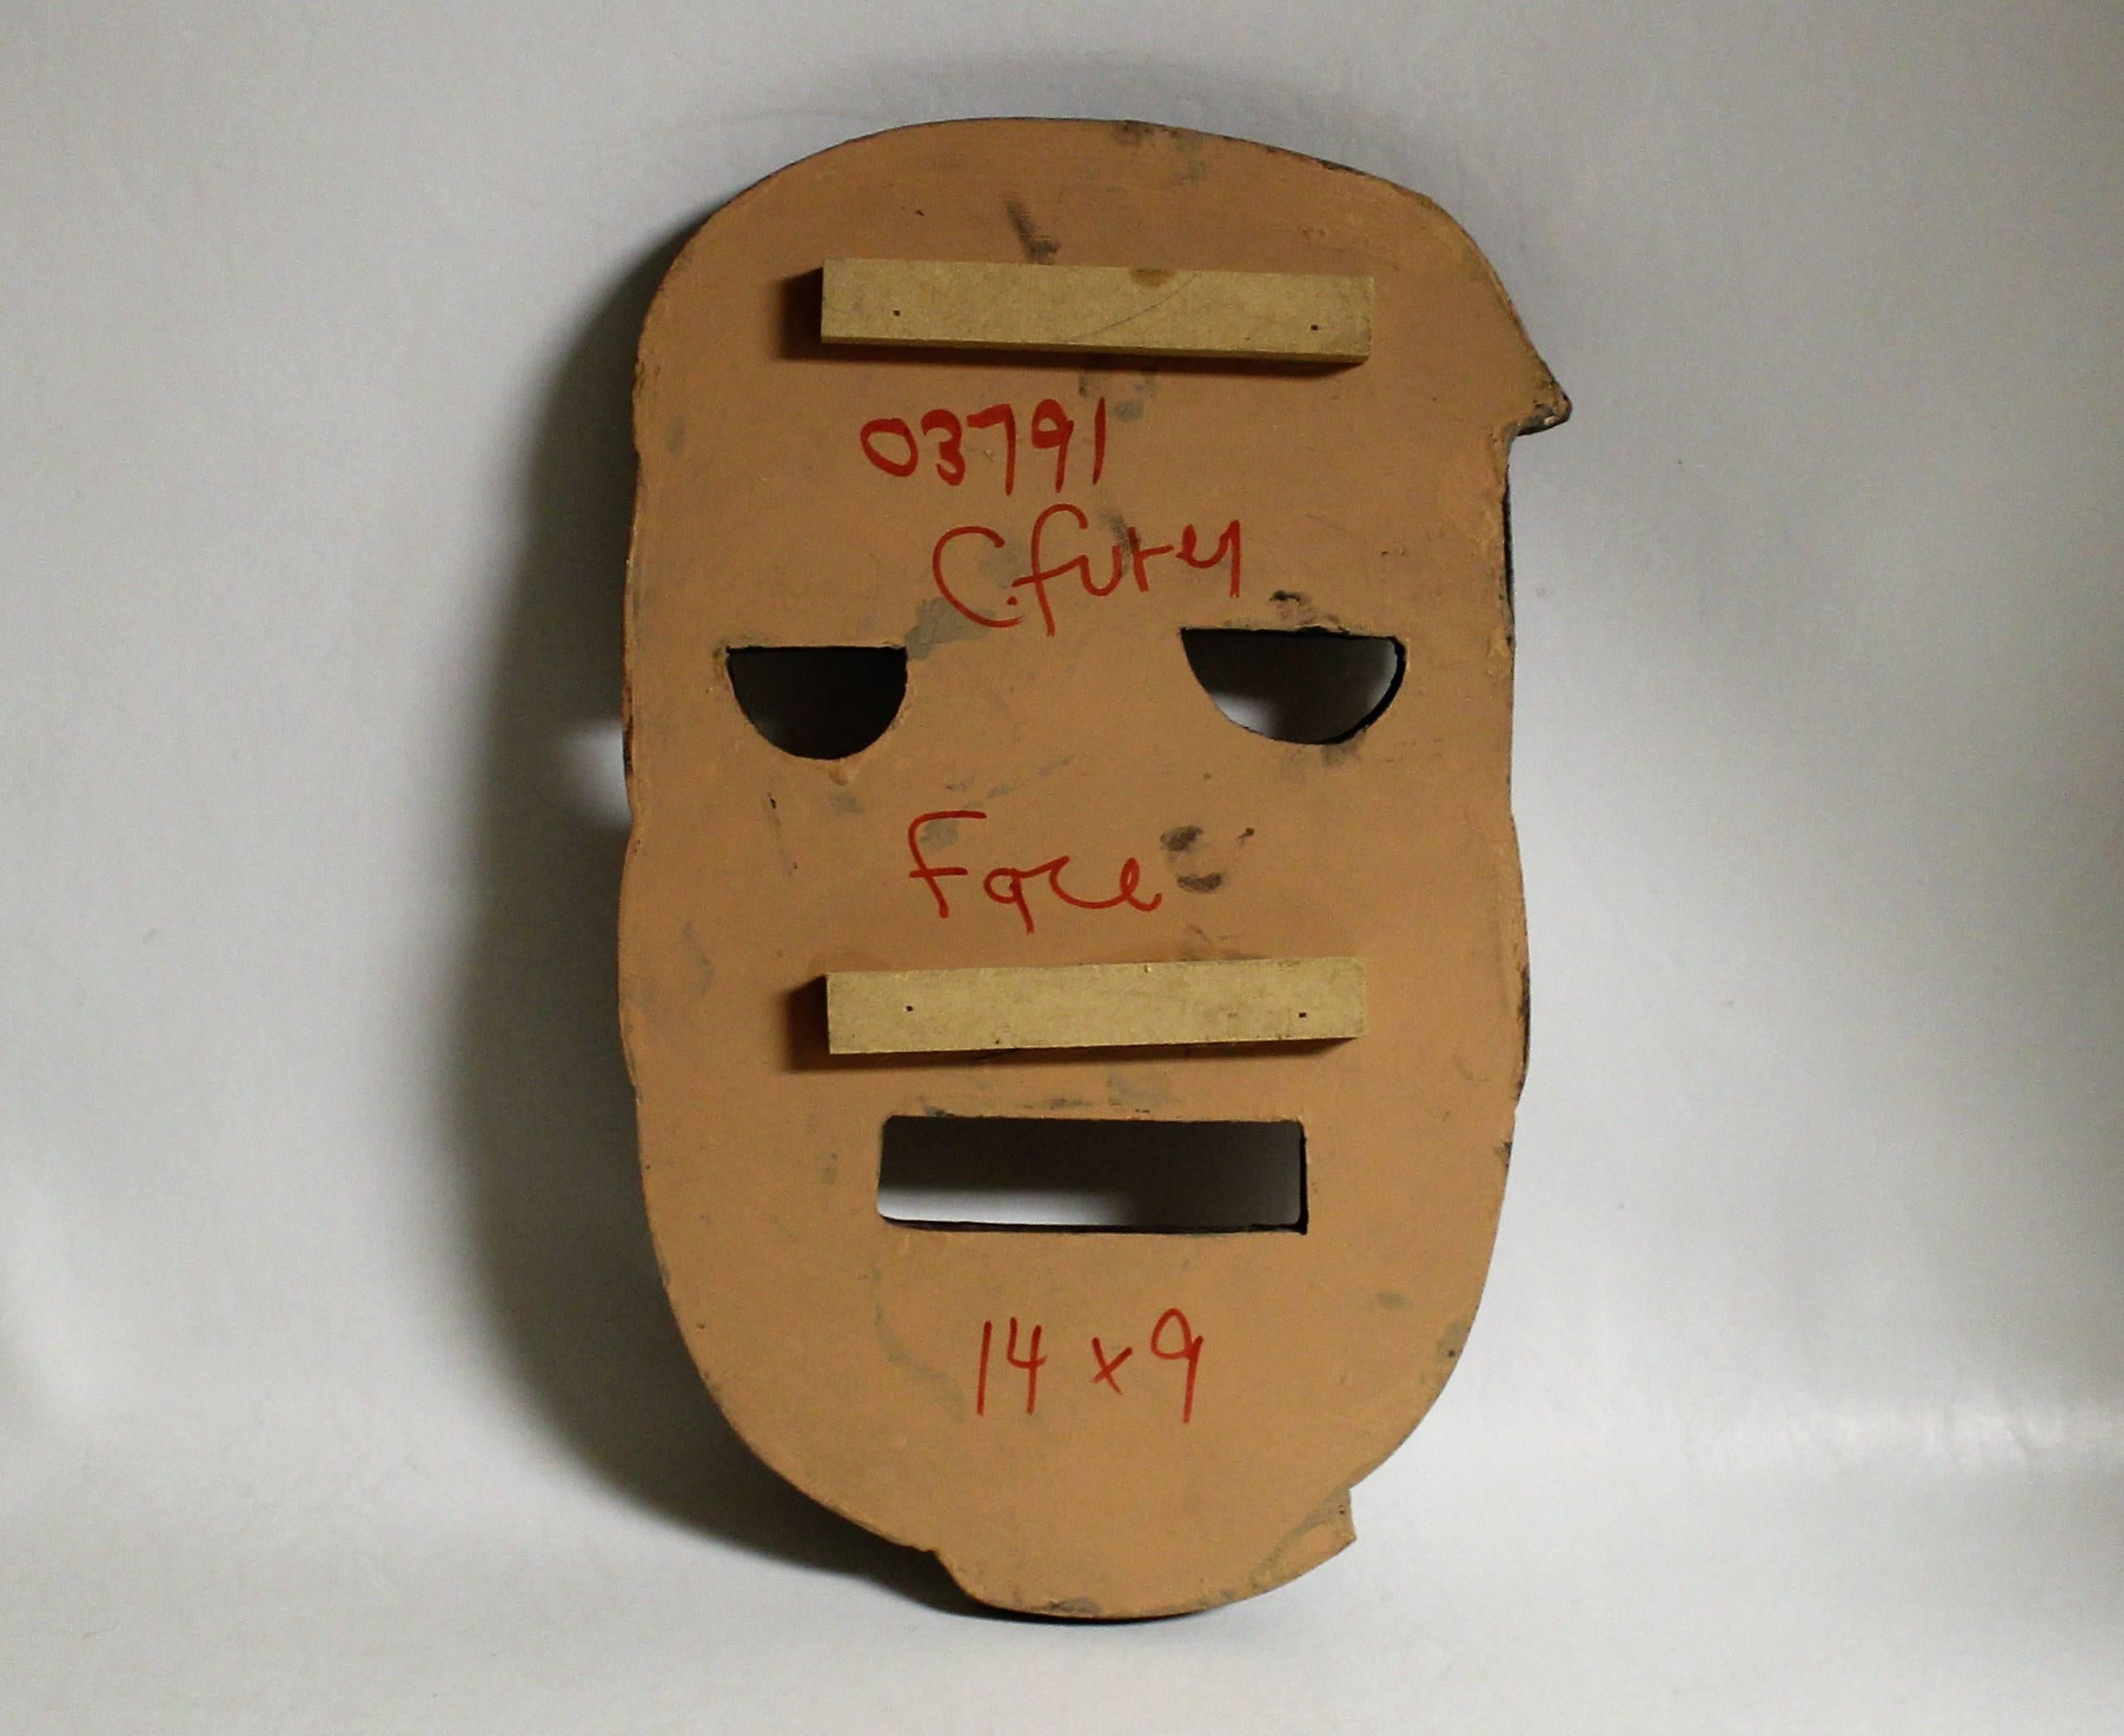 Conrad Furey Mask Carving

Conrad Furey (Canadian 1954-2008).

Conrad Furey grew up in Baie Verte in a family of 11 children; his father worked as a fisherman, logger, trucker and miner. The artist's enduring subjects intertwine the themes of his